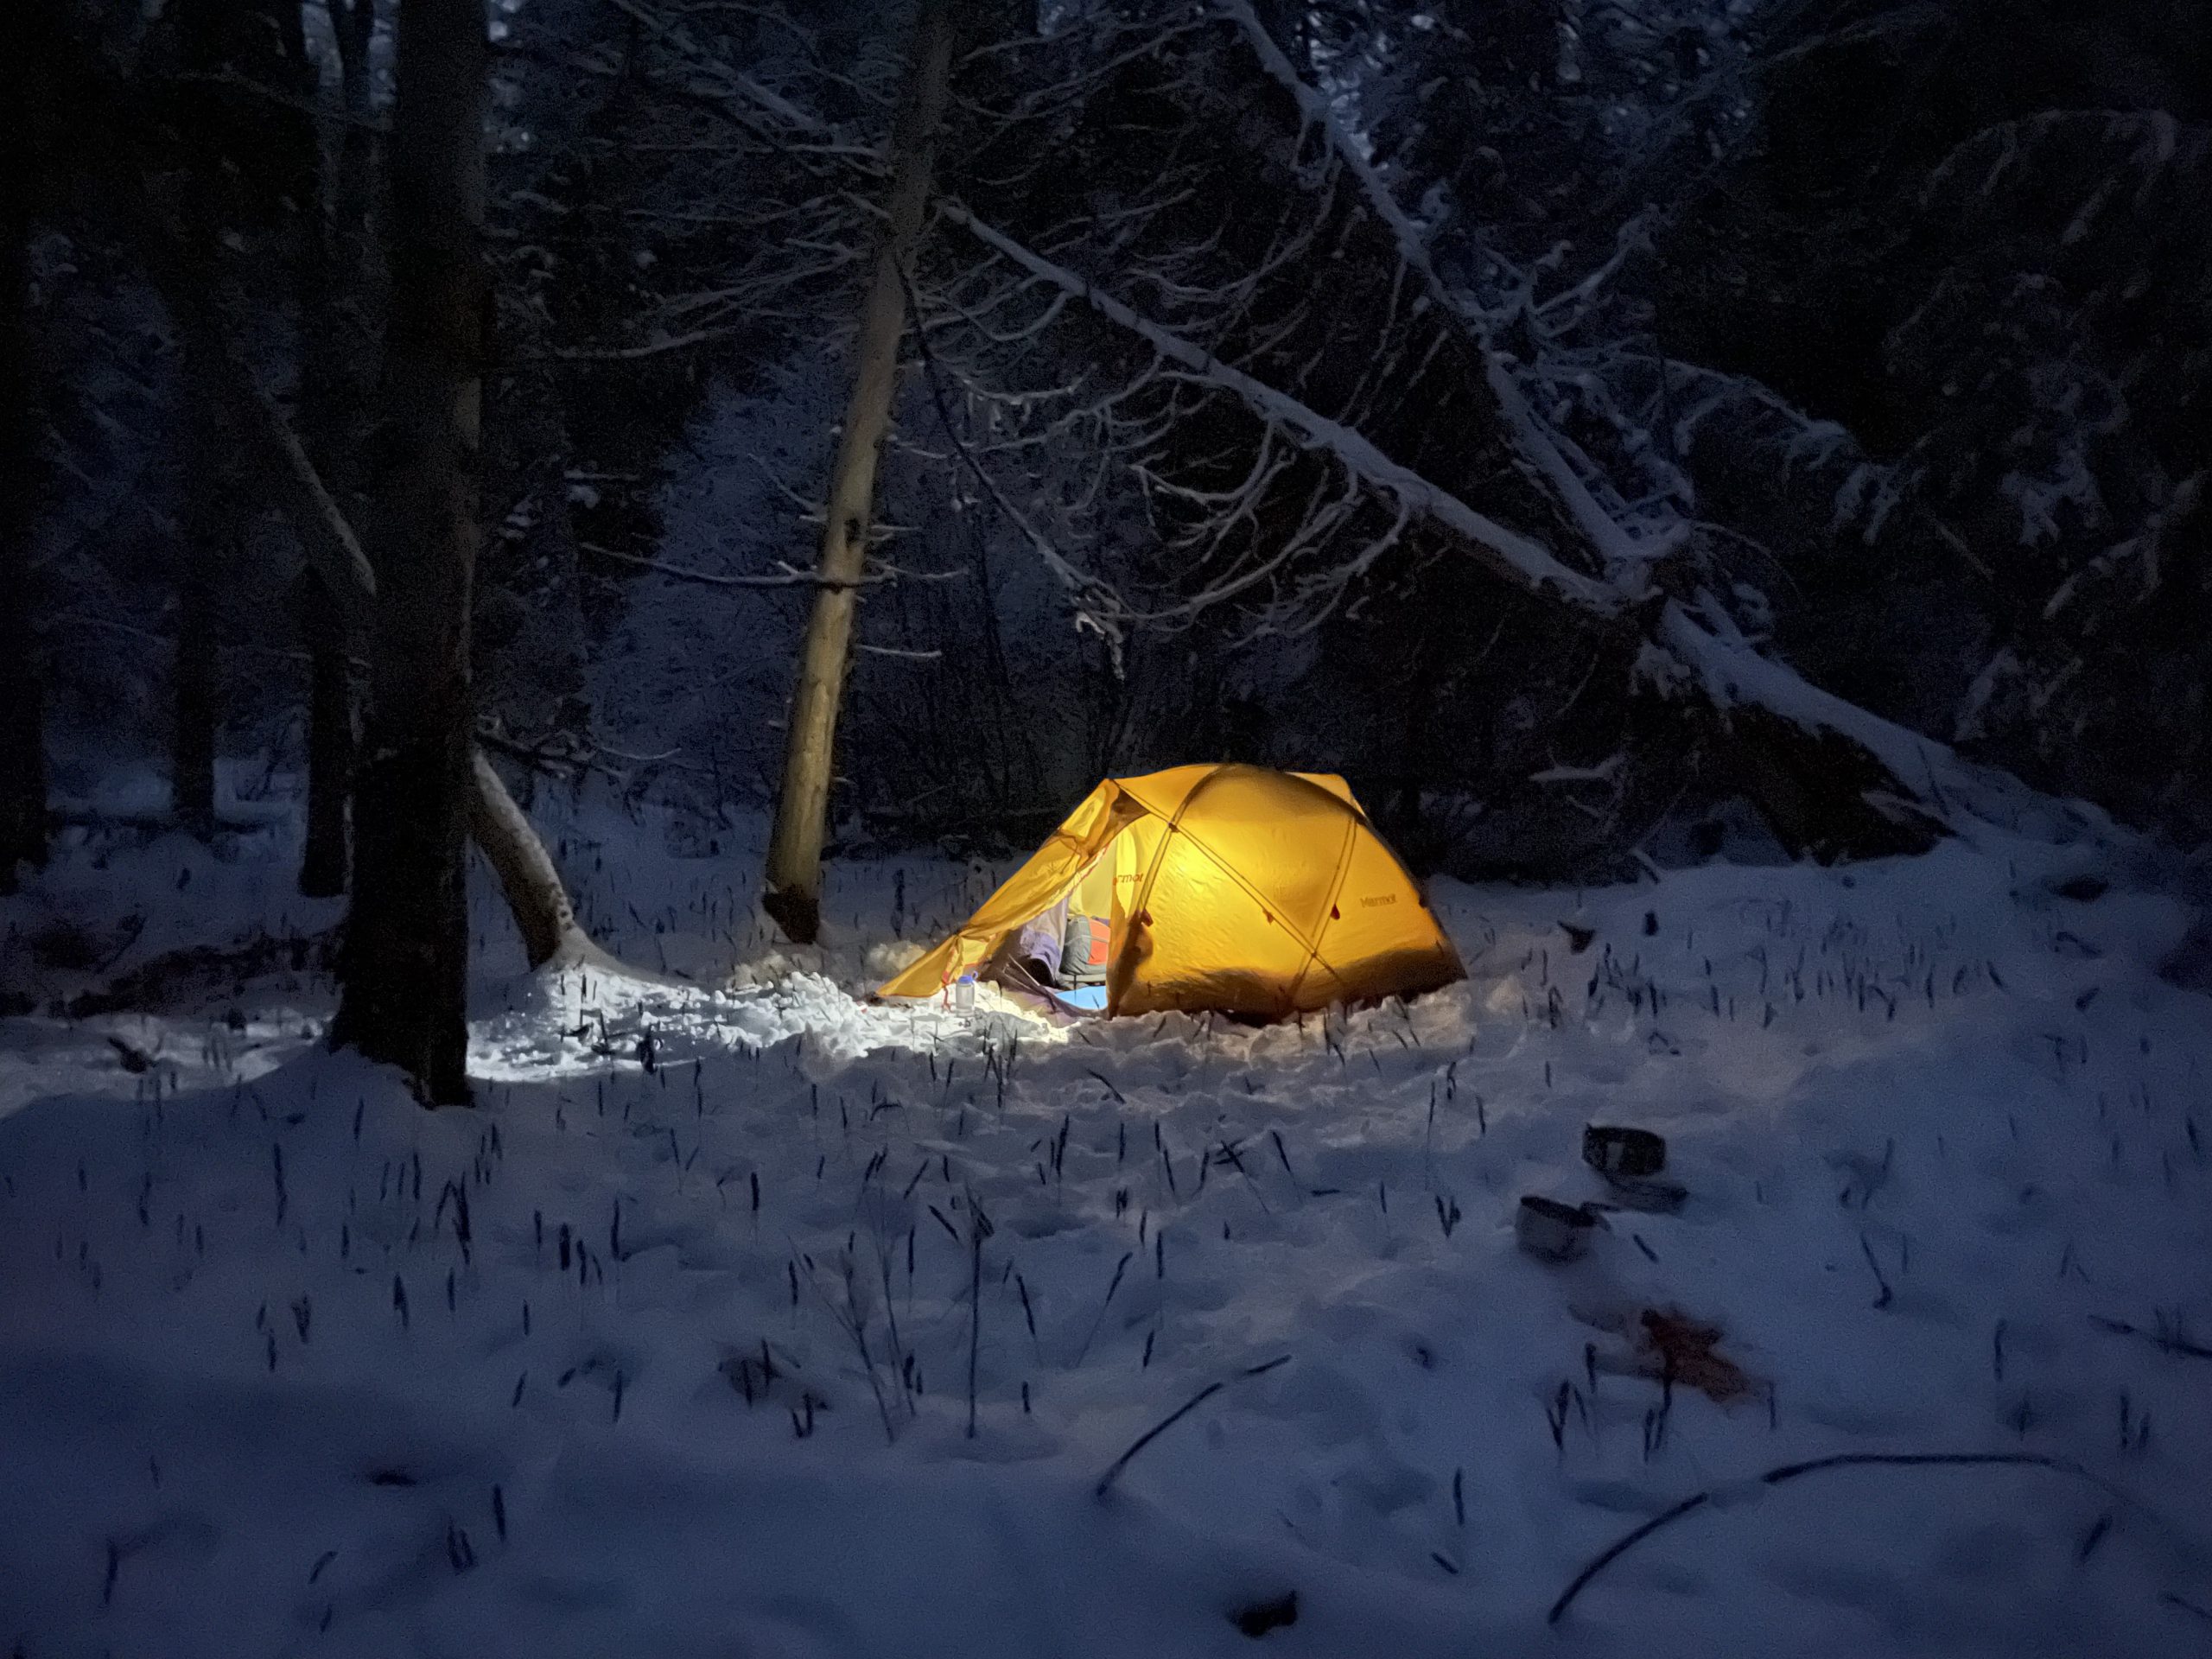 Glowing tent in the winter in Maine